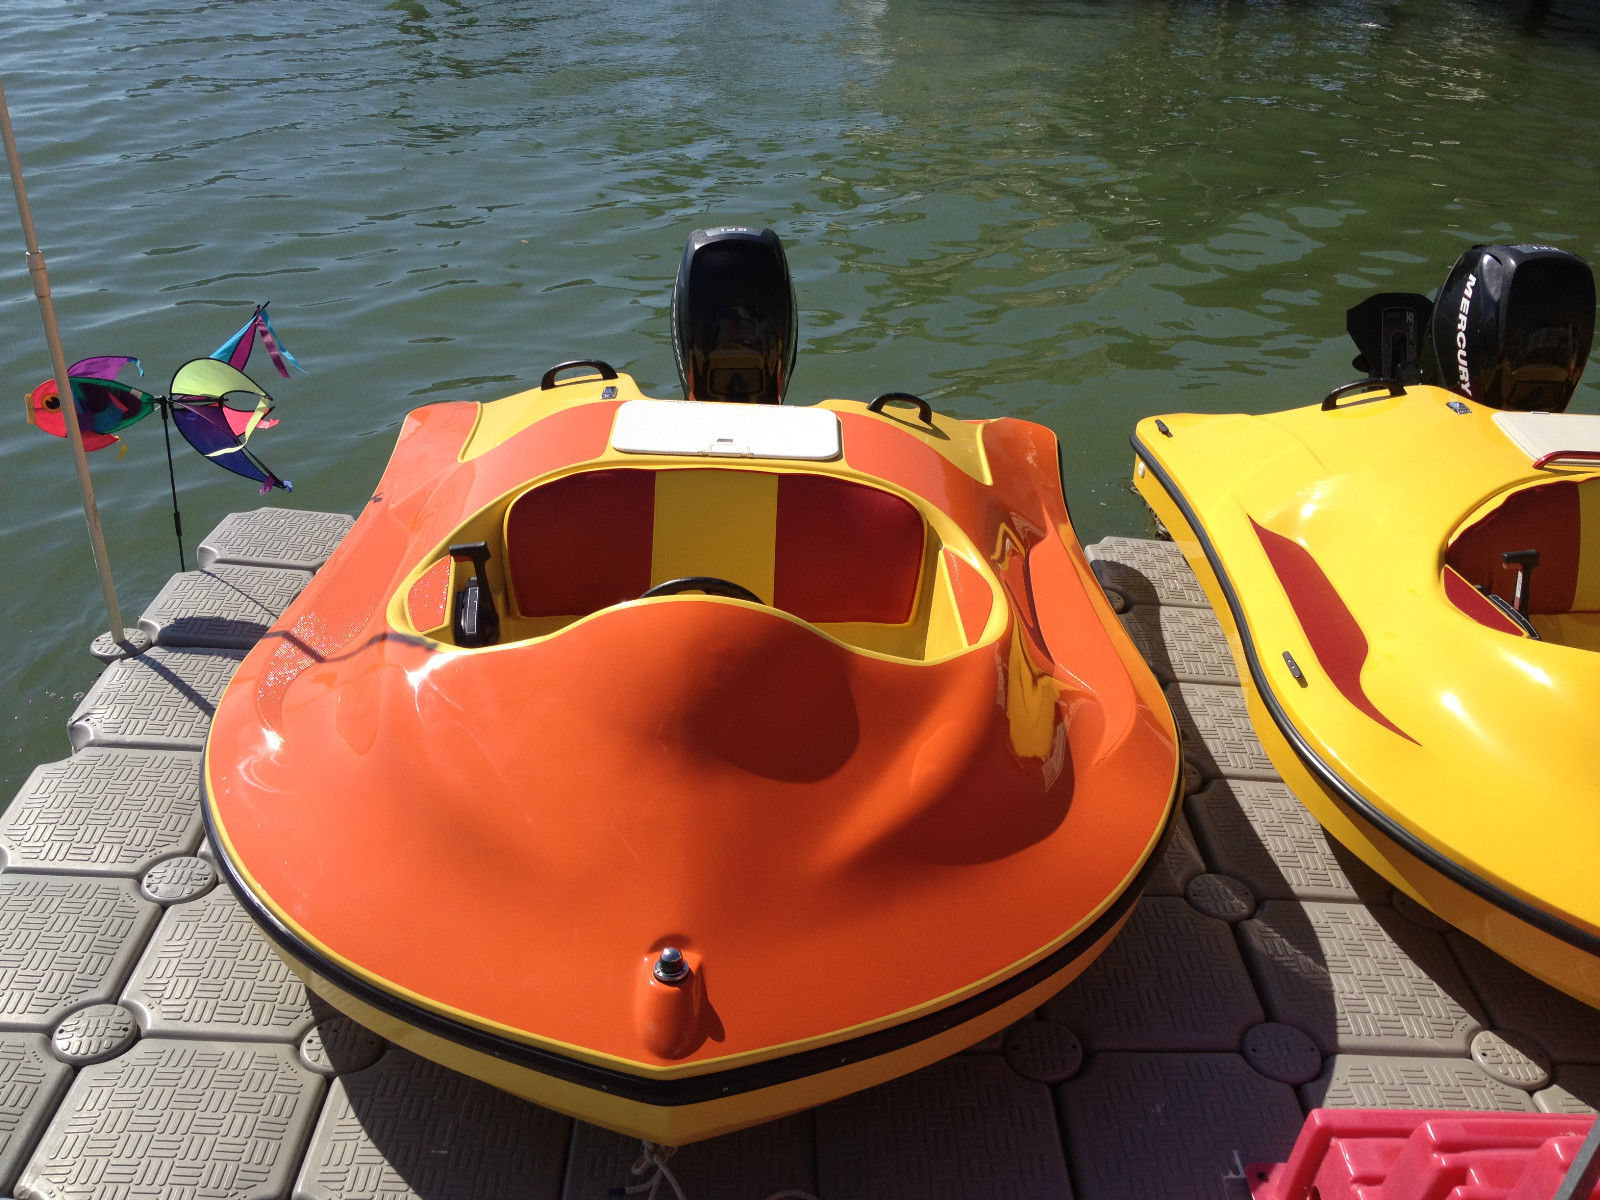 Sea Saucer 2Seater Boat, Personal Or Commercial! 2014 for sale for 1,000